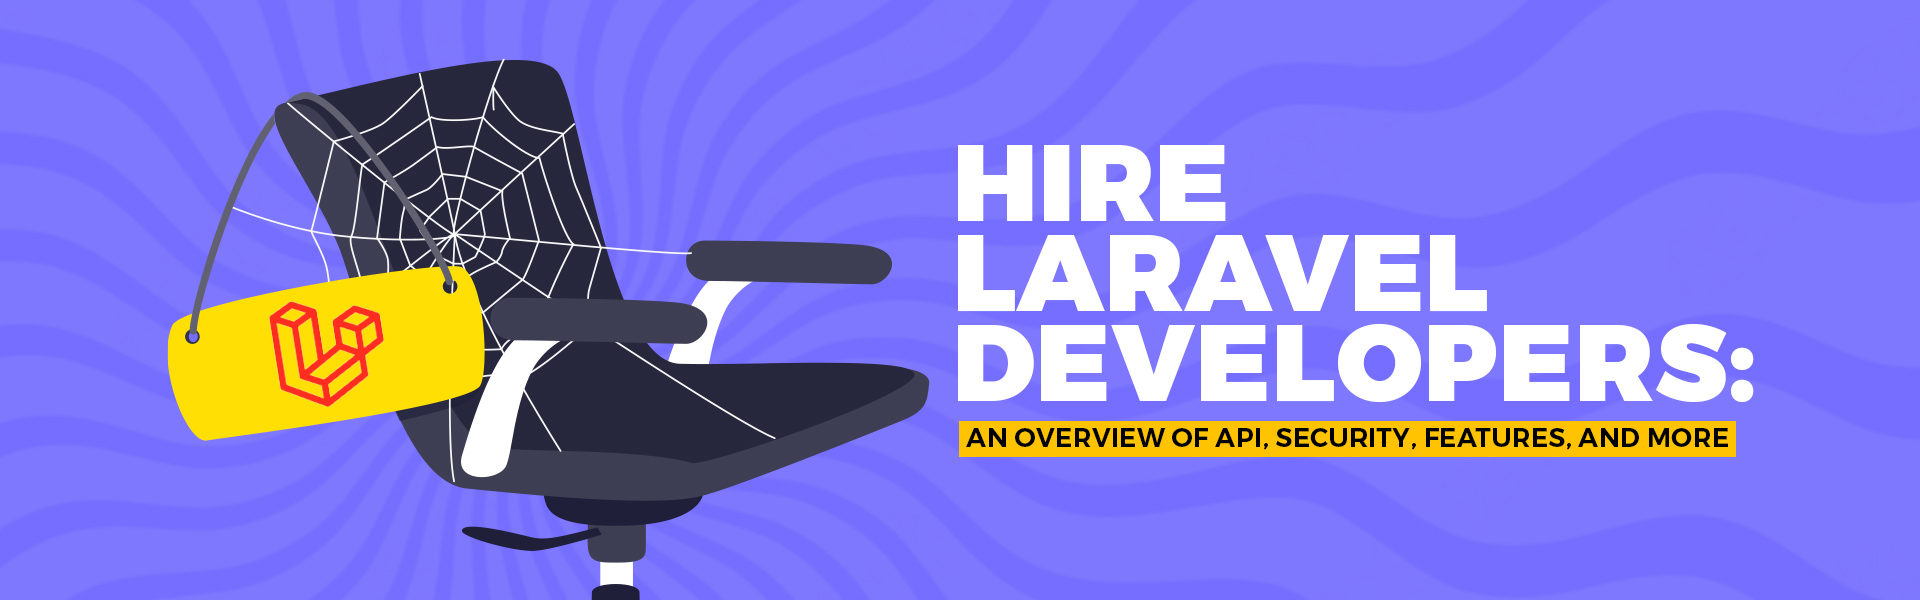 CC Blog_Hire Laravel Developers An Overview of API, Security, Features, and More_main banner